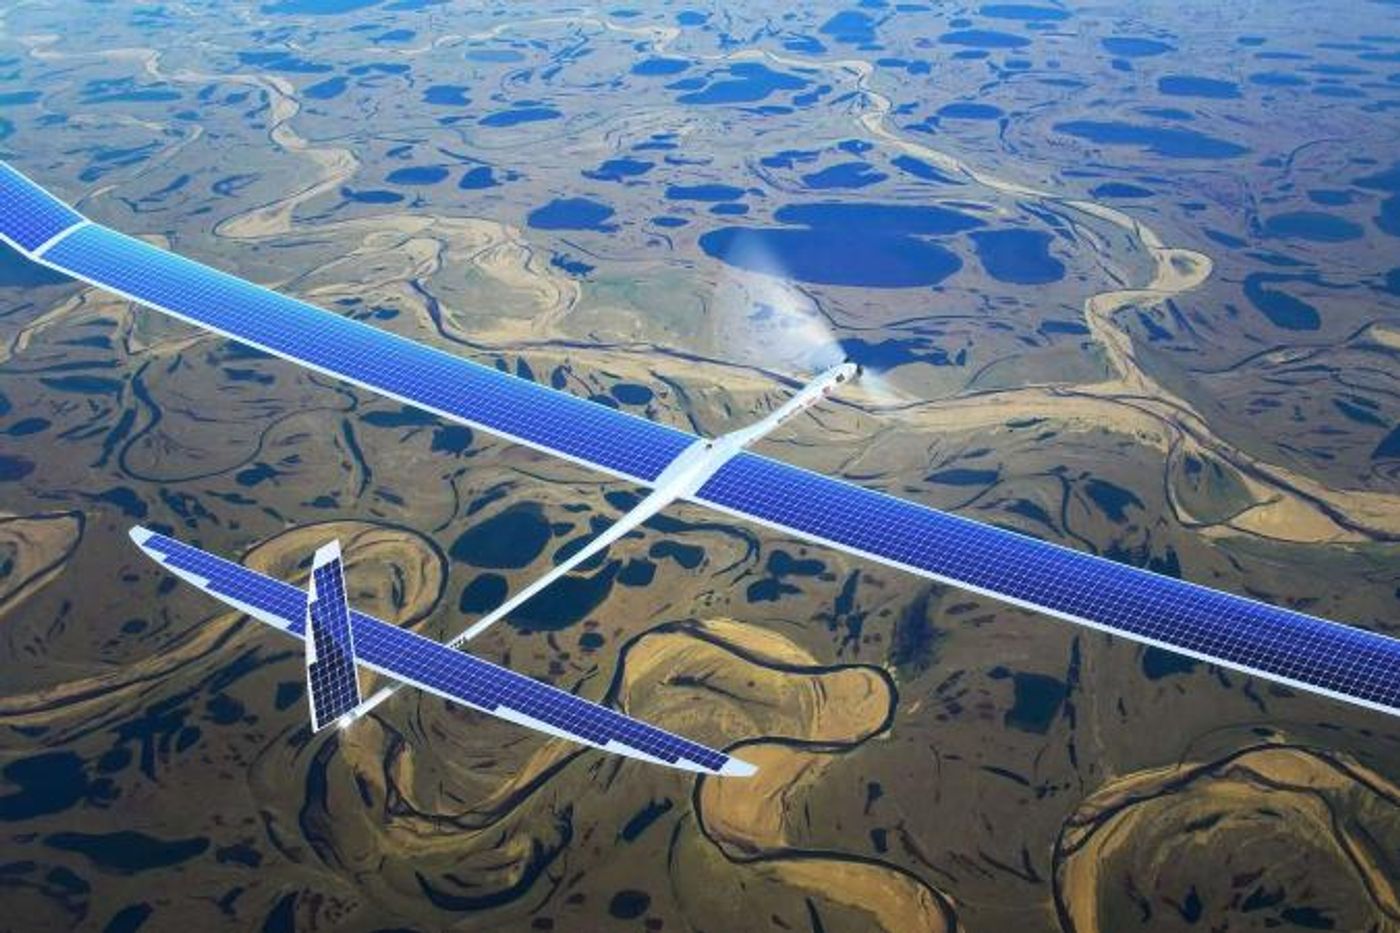 An artist's impression of Google's solar-powered 5G drones.